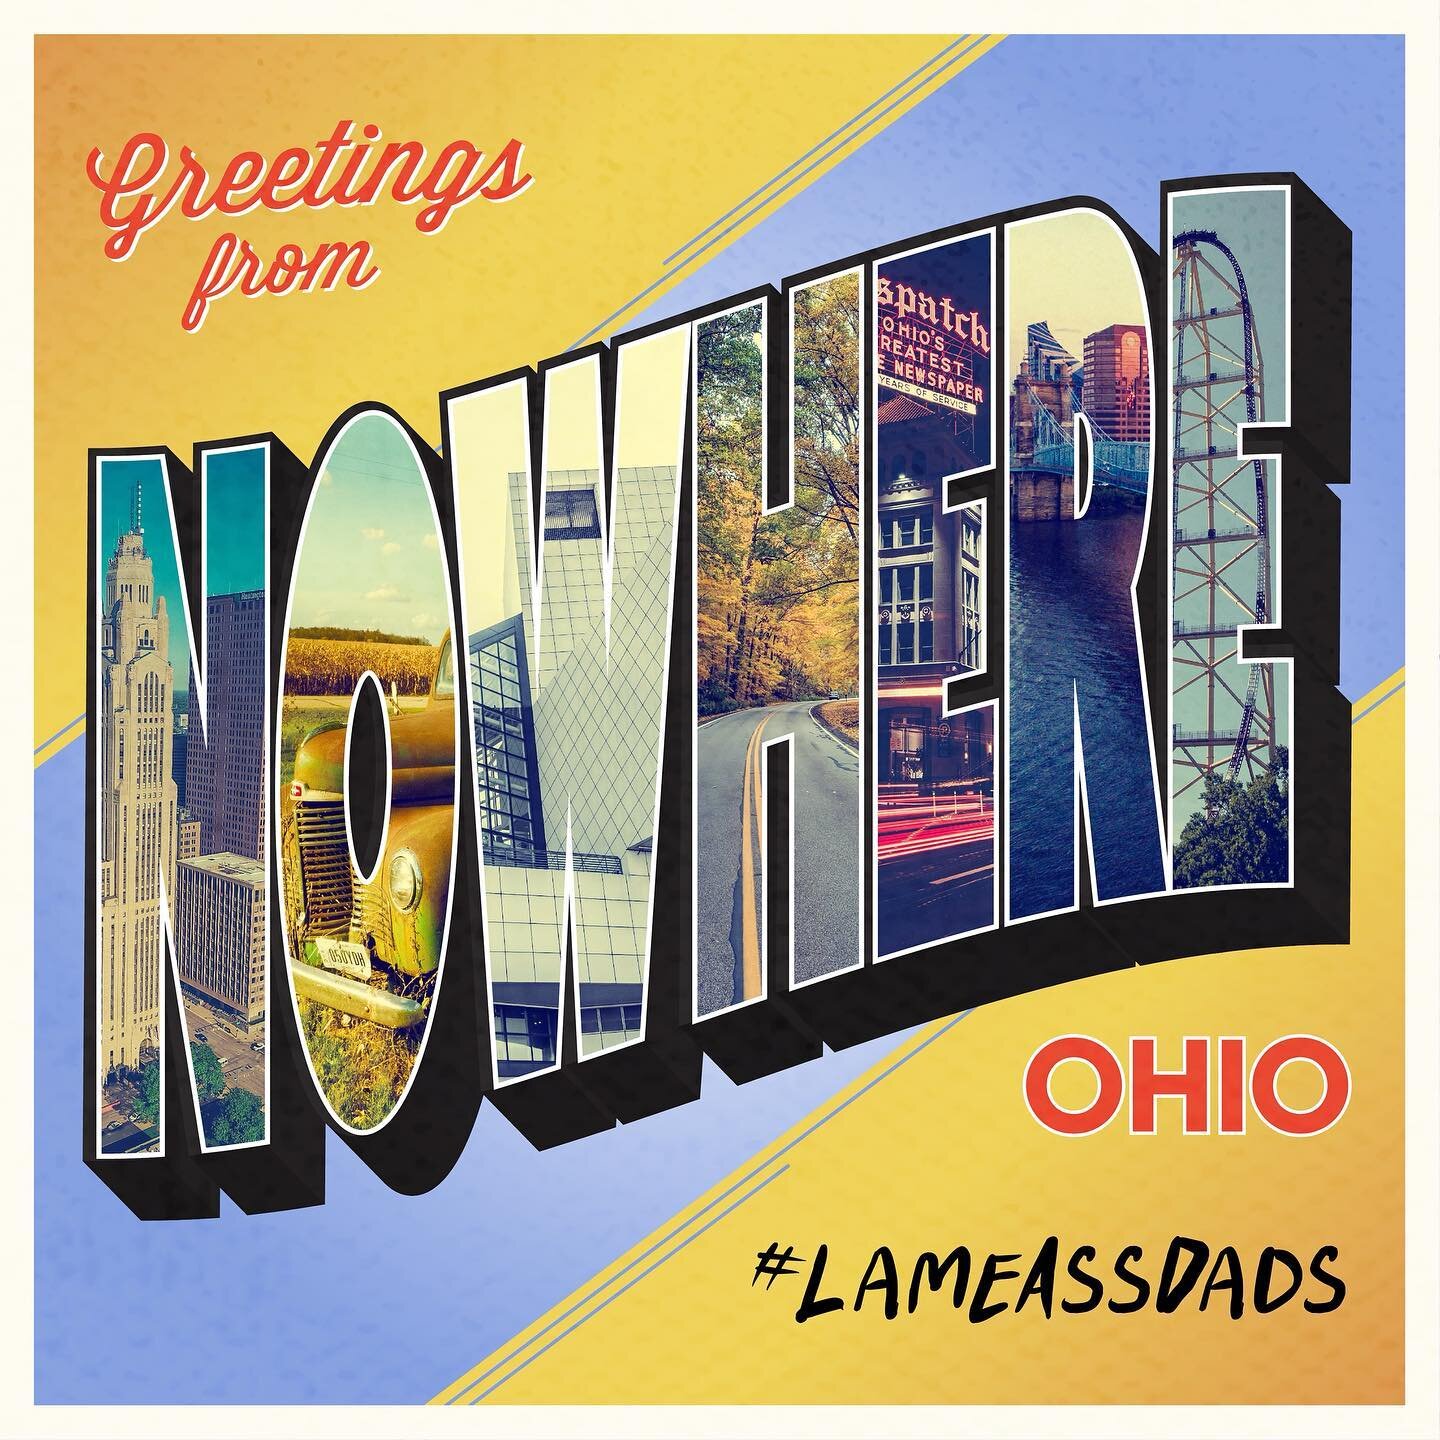 New album cover design for my friends @lameassdads 🤘🏻Preorder their album Greetings from Nowhere Ohio now! I promise it&rsquo;s not lame 😁
:
:
#lunalilydesigns #graphicdesign #graphicdesigner #punkrock #ohiopunkrock #midwestpunkrock #lameassdads #